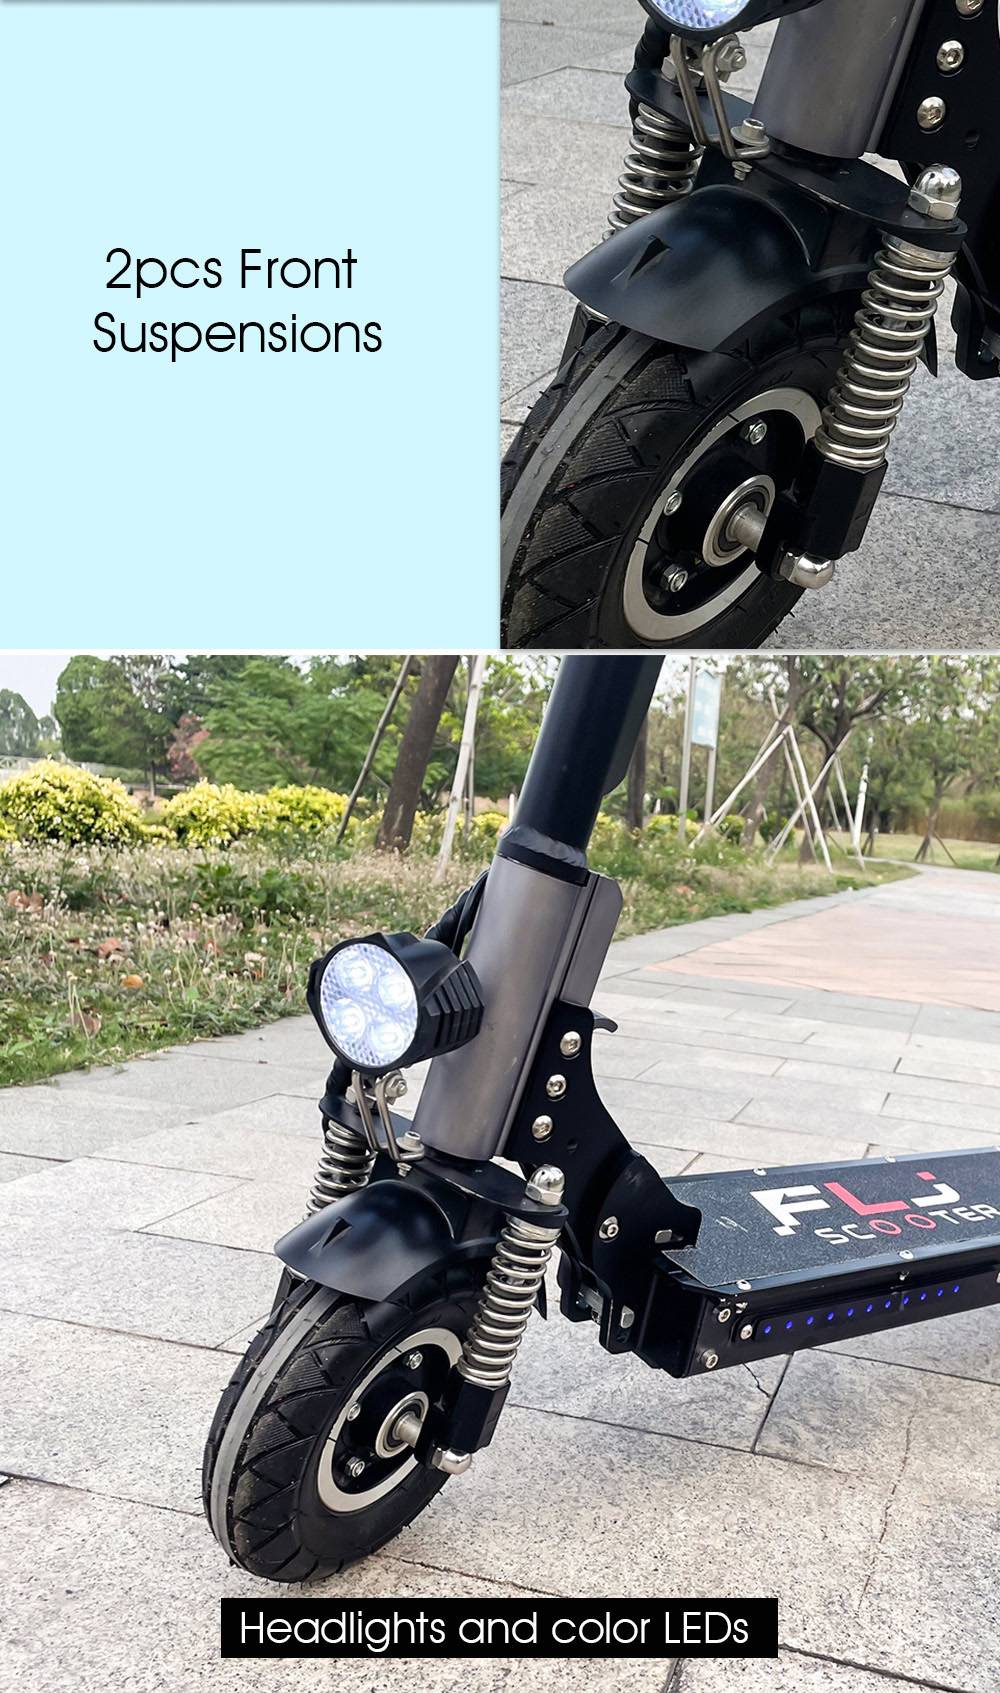 https://img.gkbcdn.com/s3/d/202209/FLJ-C8-800W-Motor-Electric-Scooter-without-Seat-517212-6.jpg